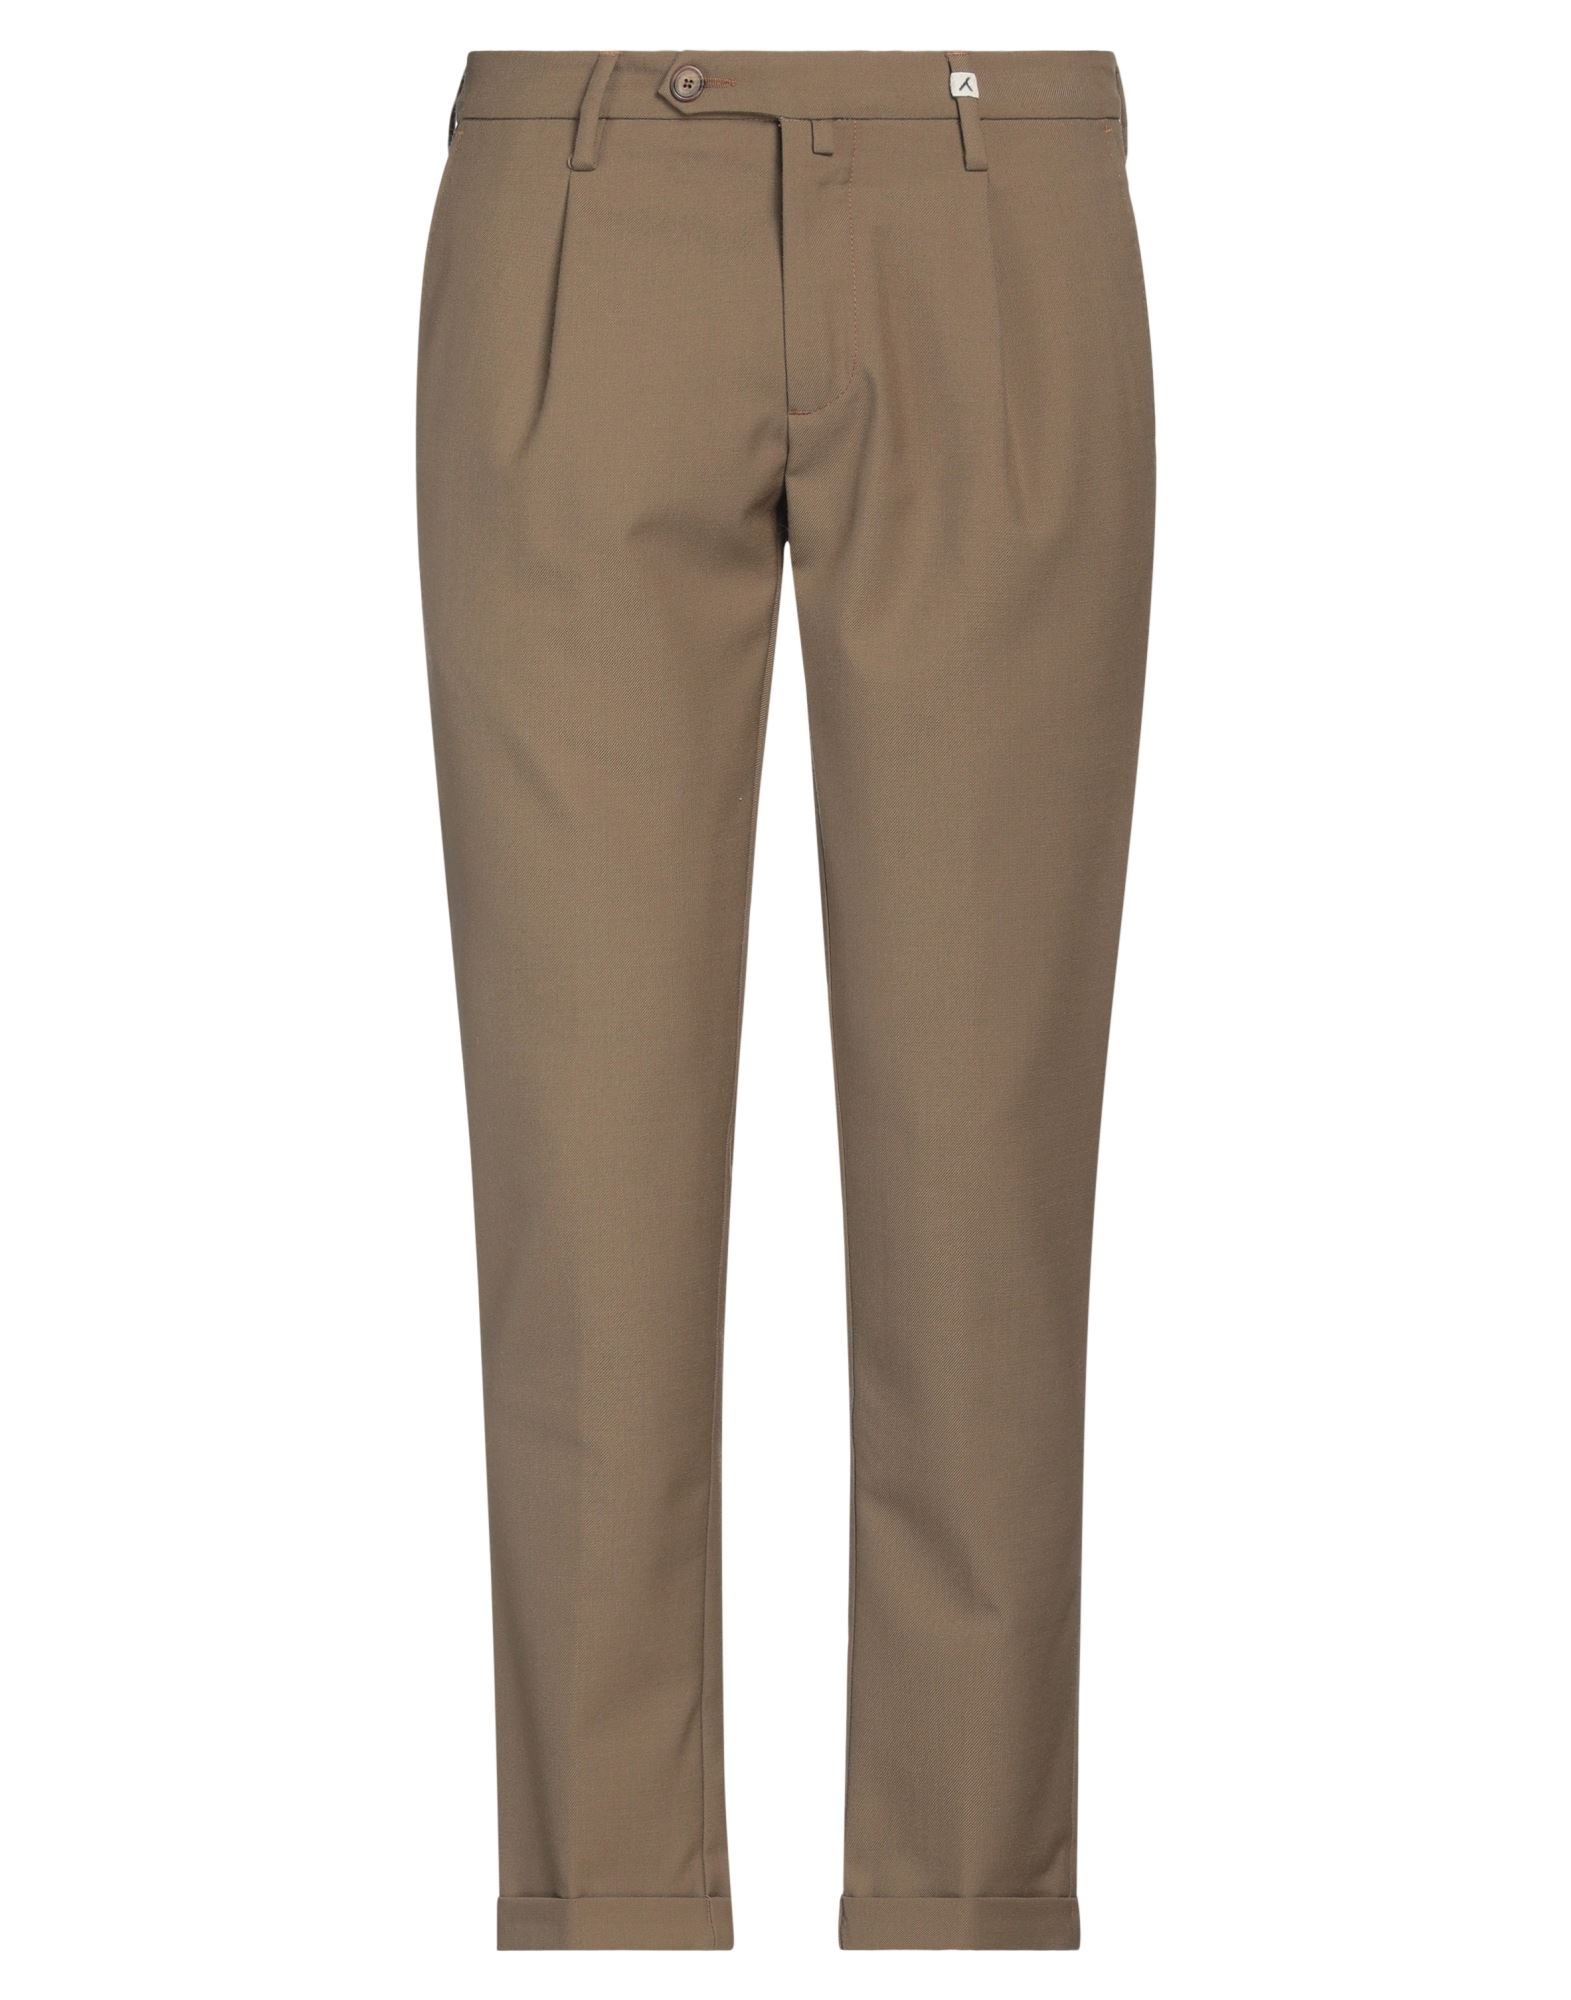 Myths Pants In Beige